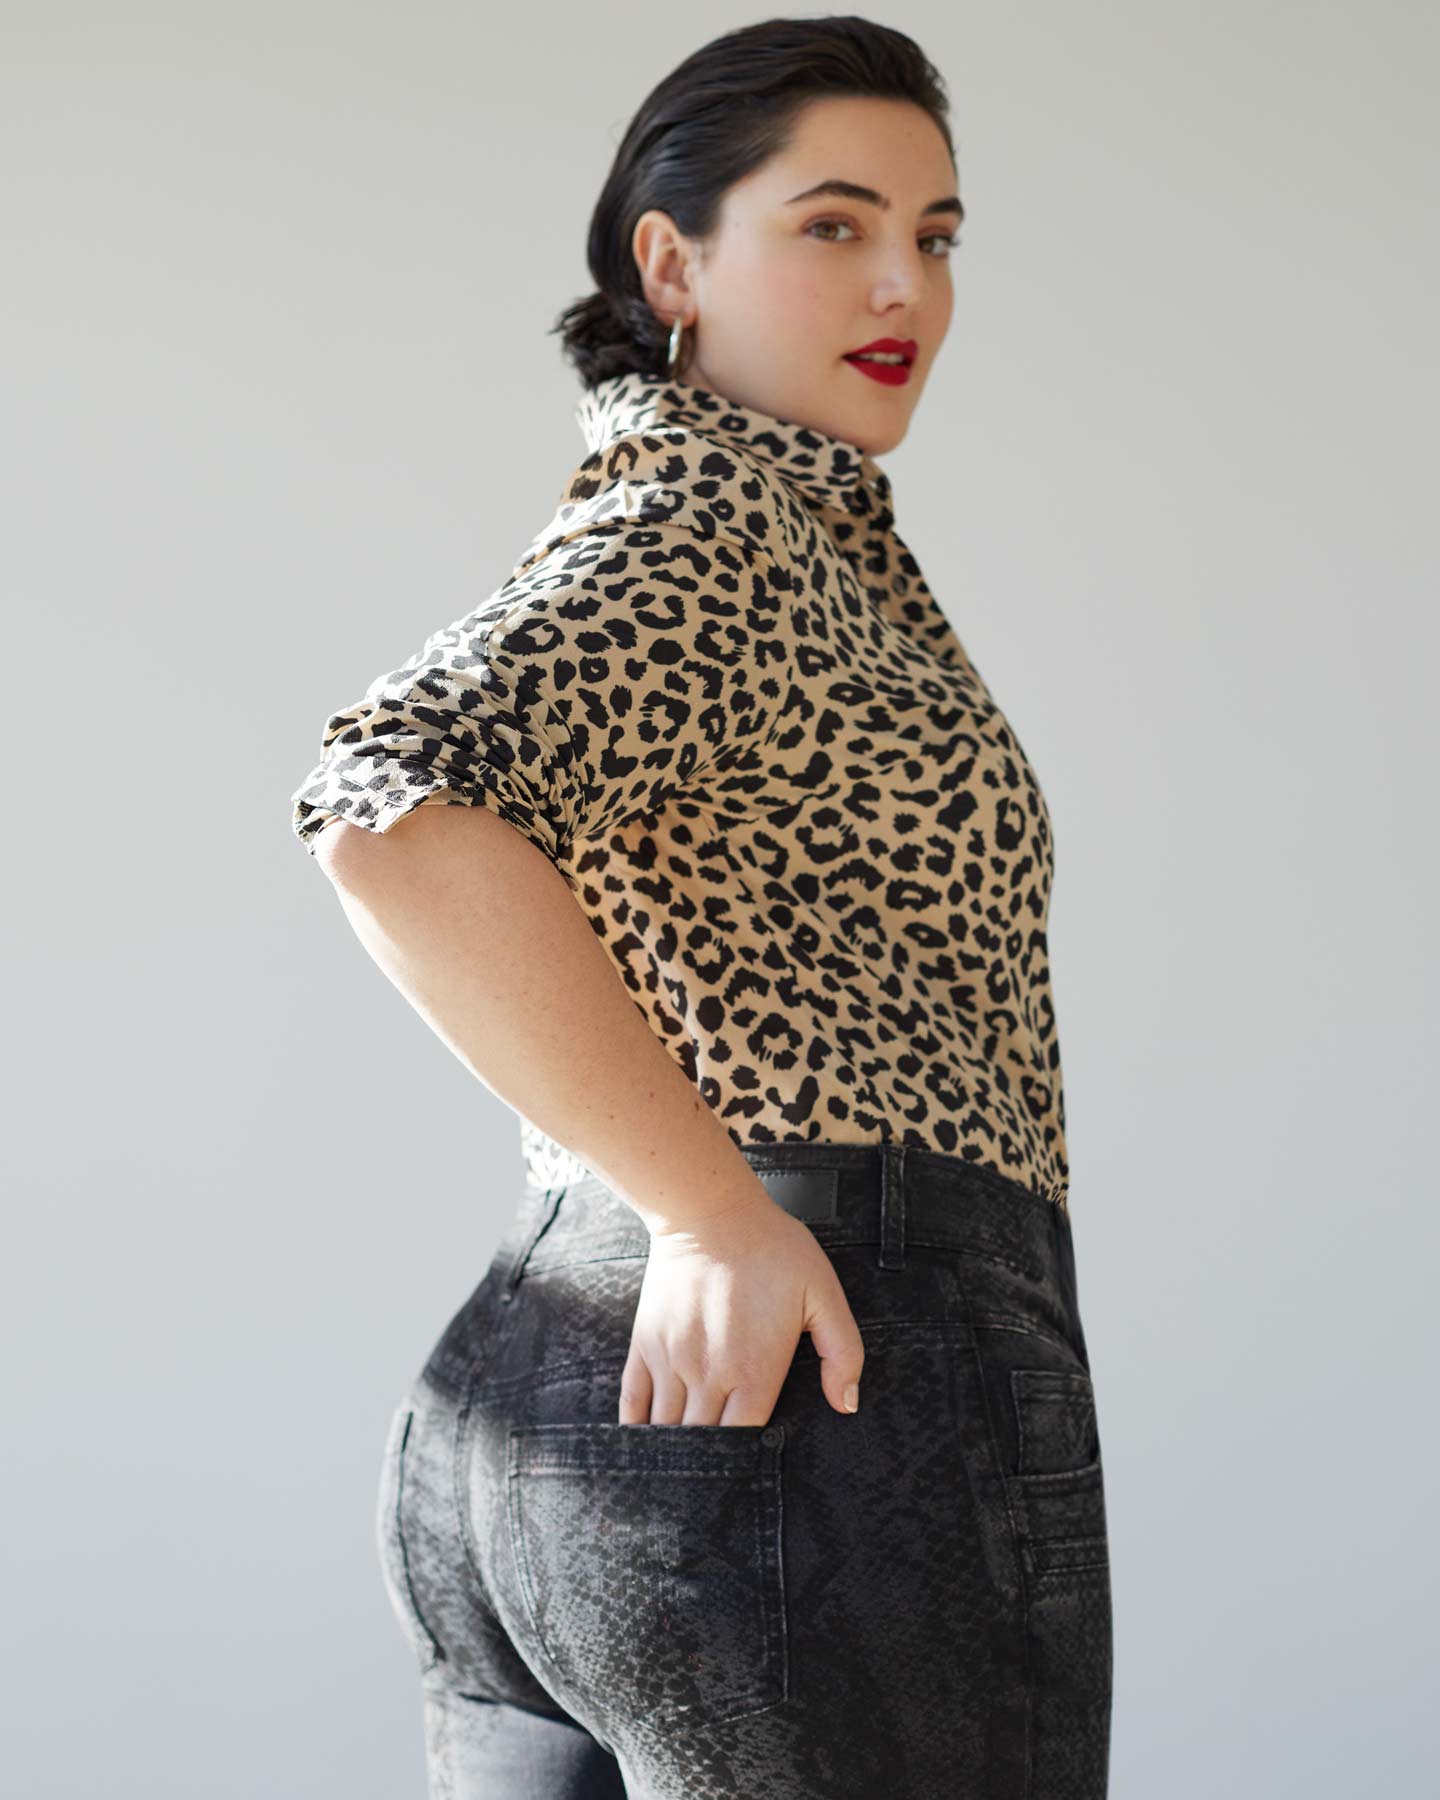 Curvy Girls Fashion Tips For Women In A Style Rut